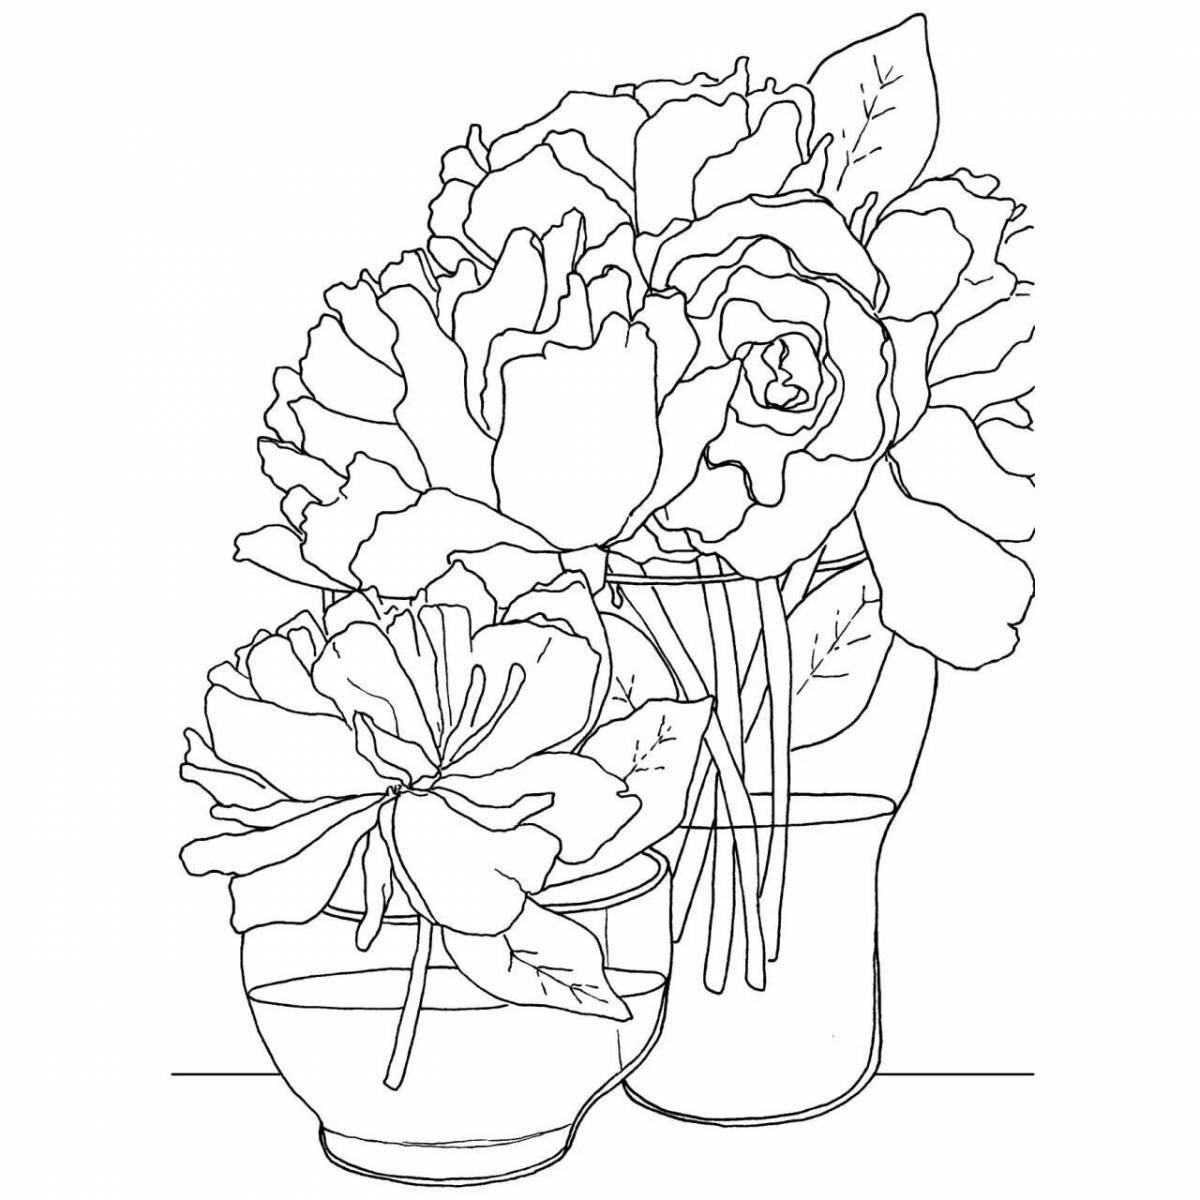 Coloring page delightful bouquet in a vase